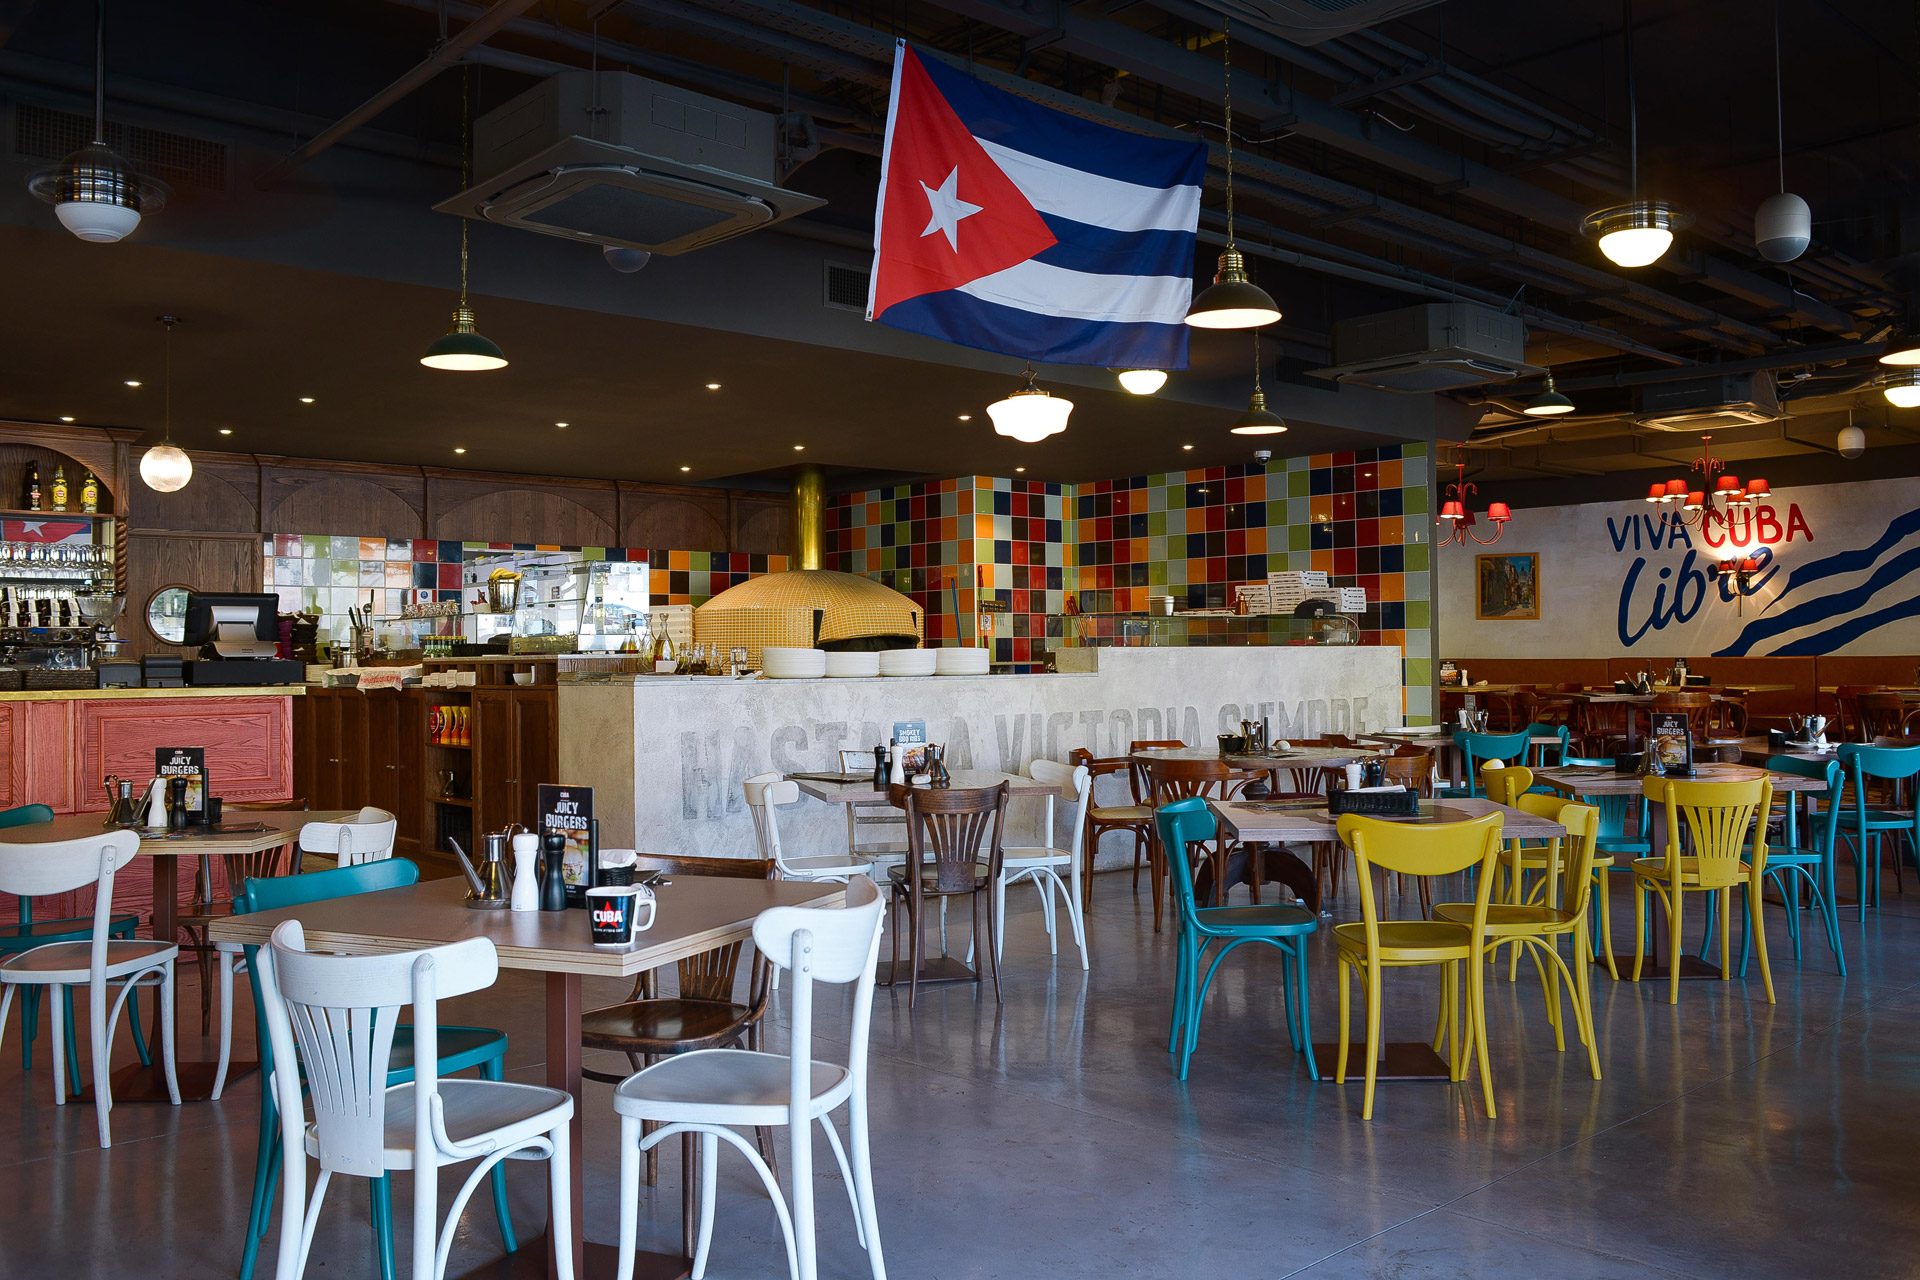 Our vintage-style lights decorate the Cuban-inspired interior of this restaurant